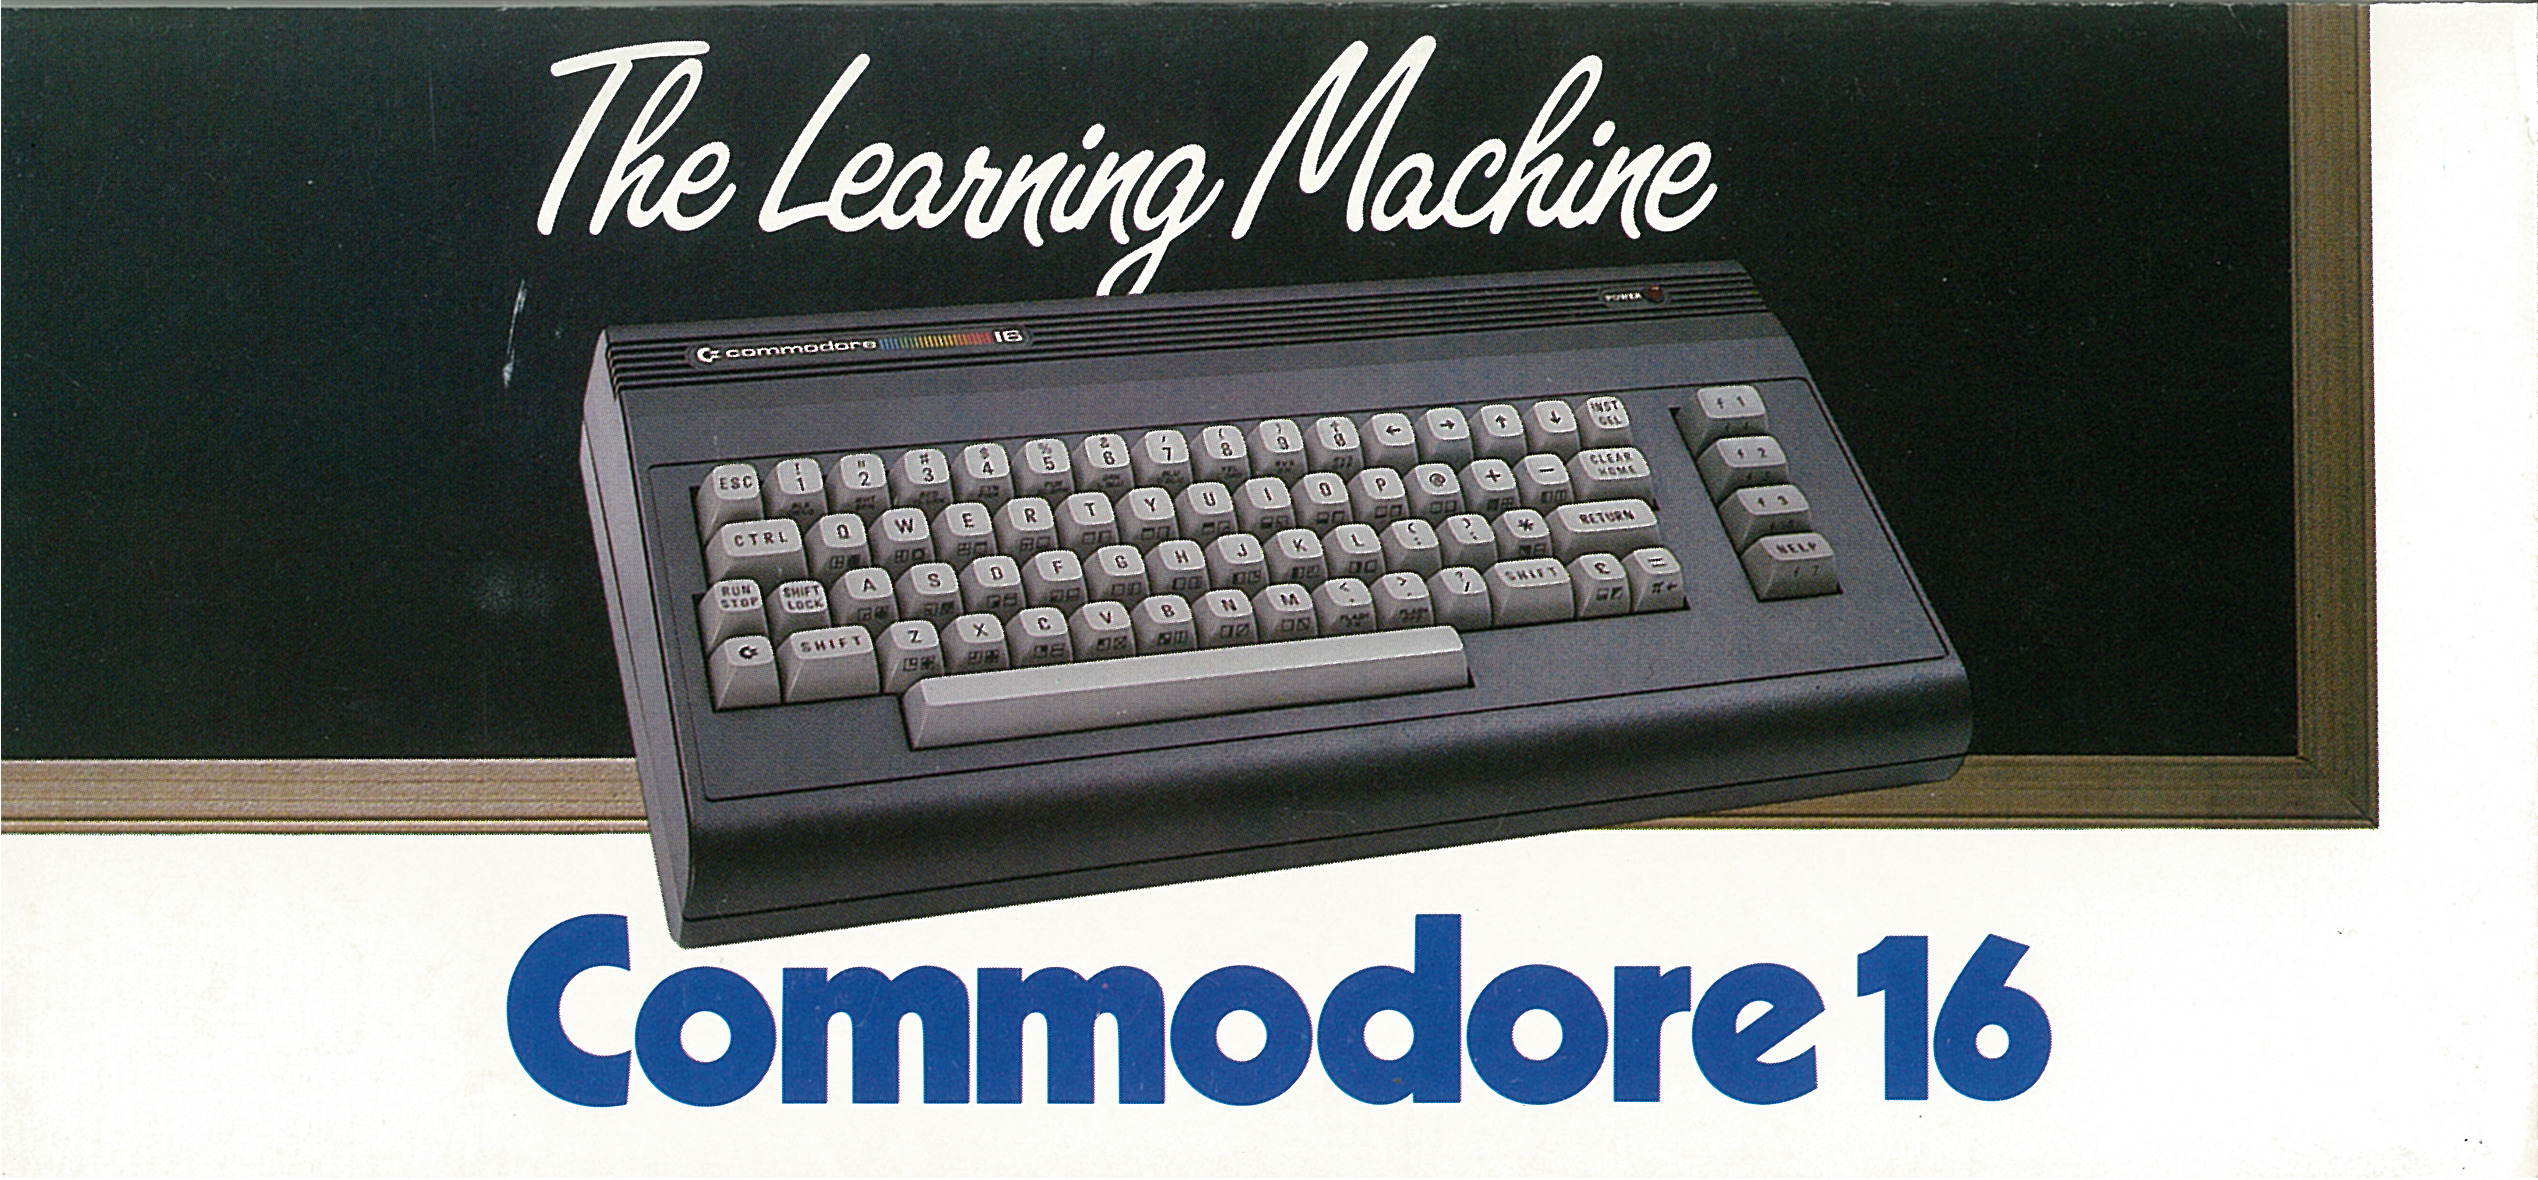 Commodore 16 The Learning Machine